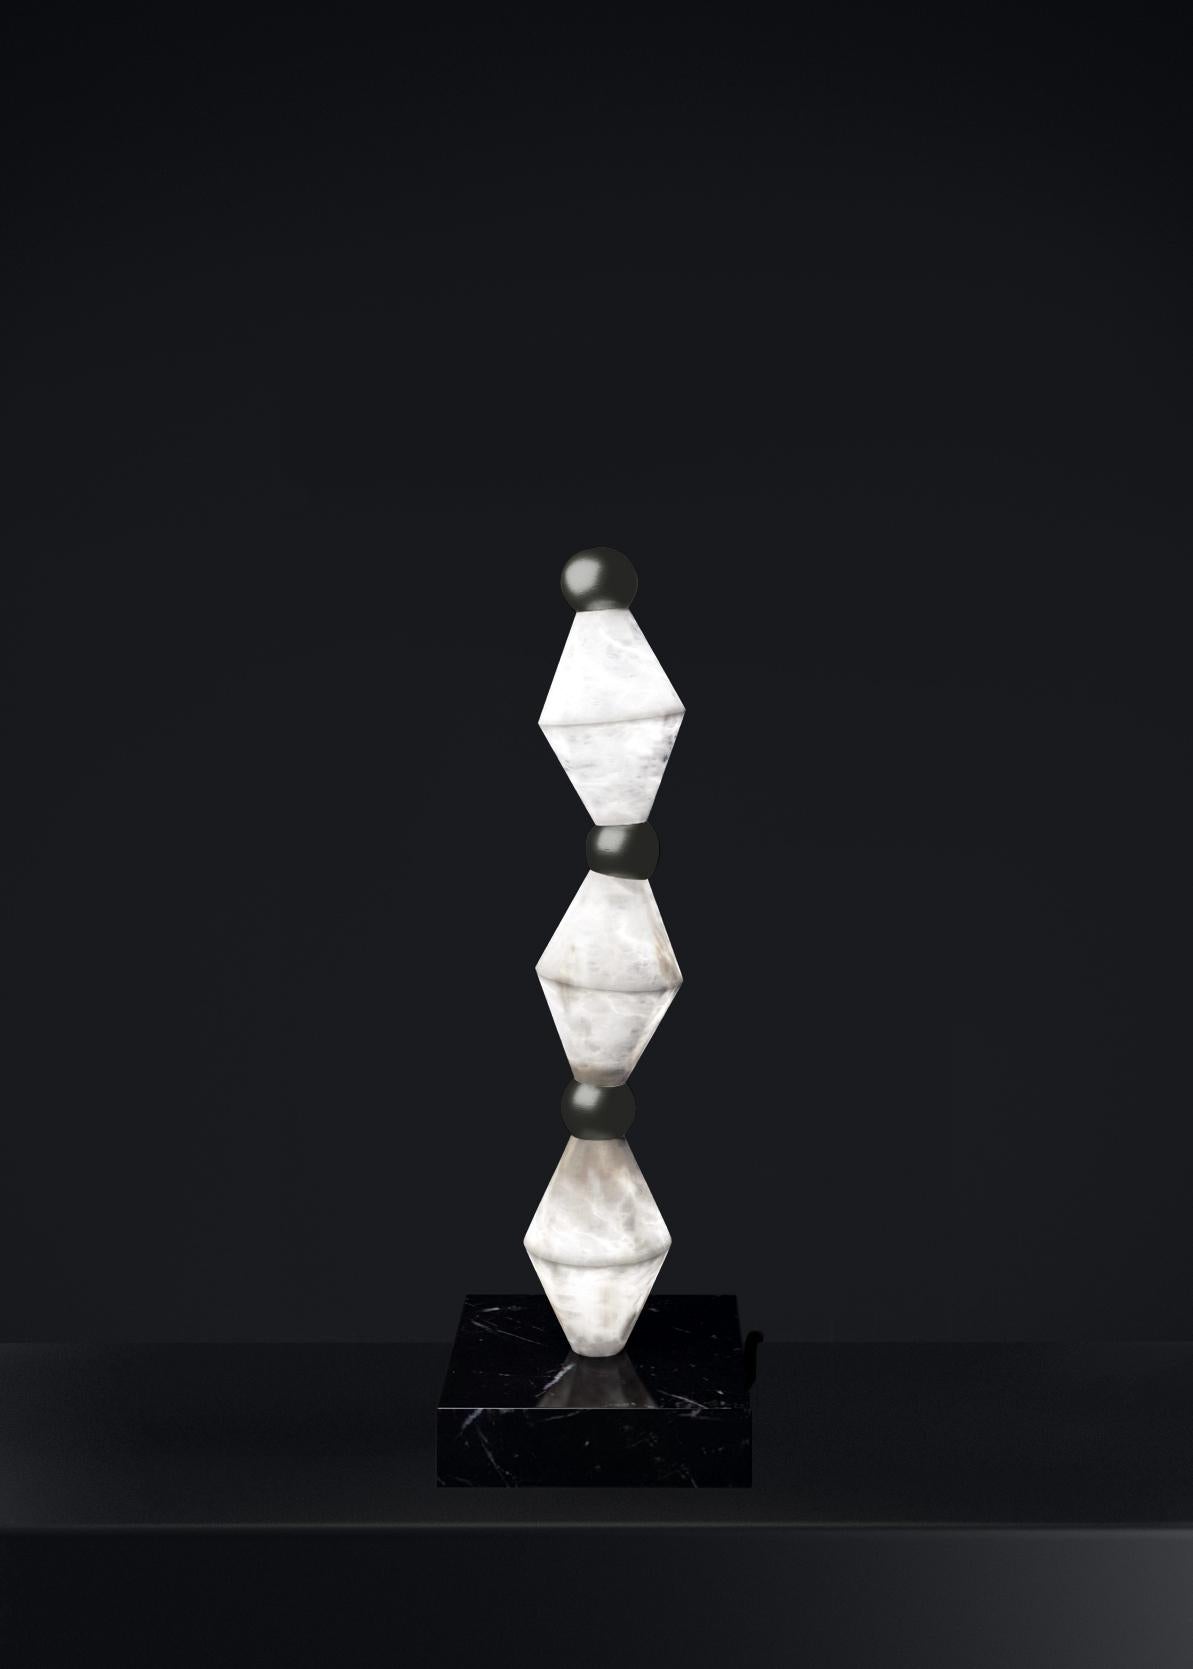 Chronos Brushed Black Table Lamp by Alabastro Italiano
Dimensions: D 15 x W 15 x H 71,5 cm.
Materials: White alabaster, marble and metal.

Available in different finishes: Shiny Silver, Bronze, Brushed Brass, Ruggine of Florence, Brushed Burnished,